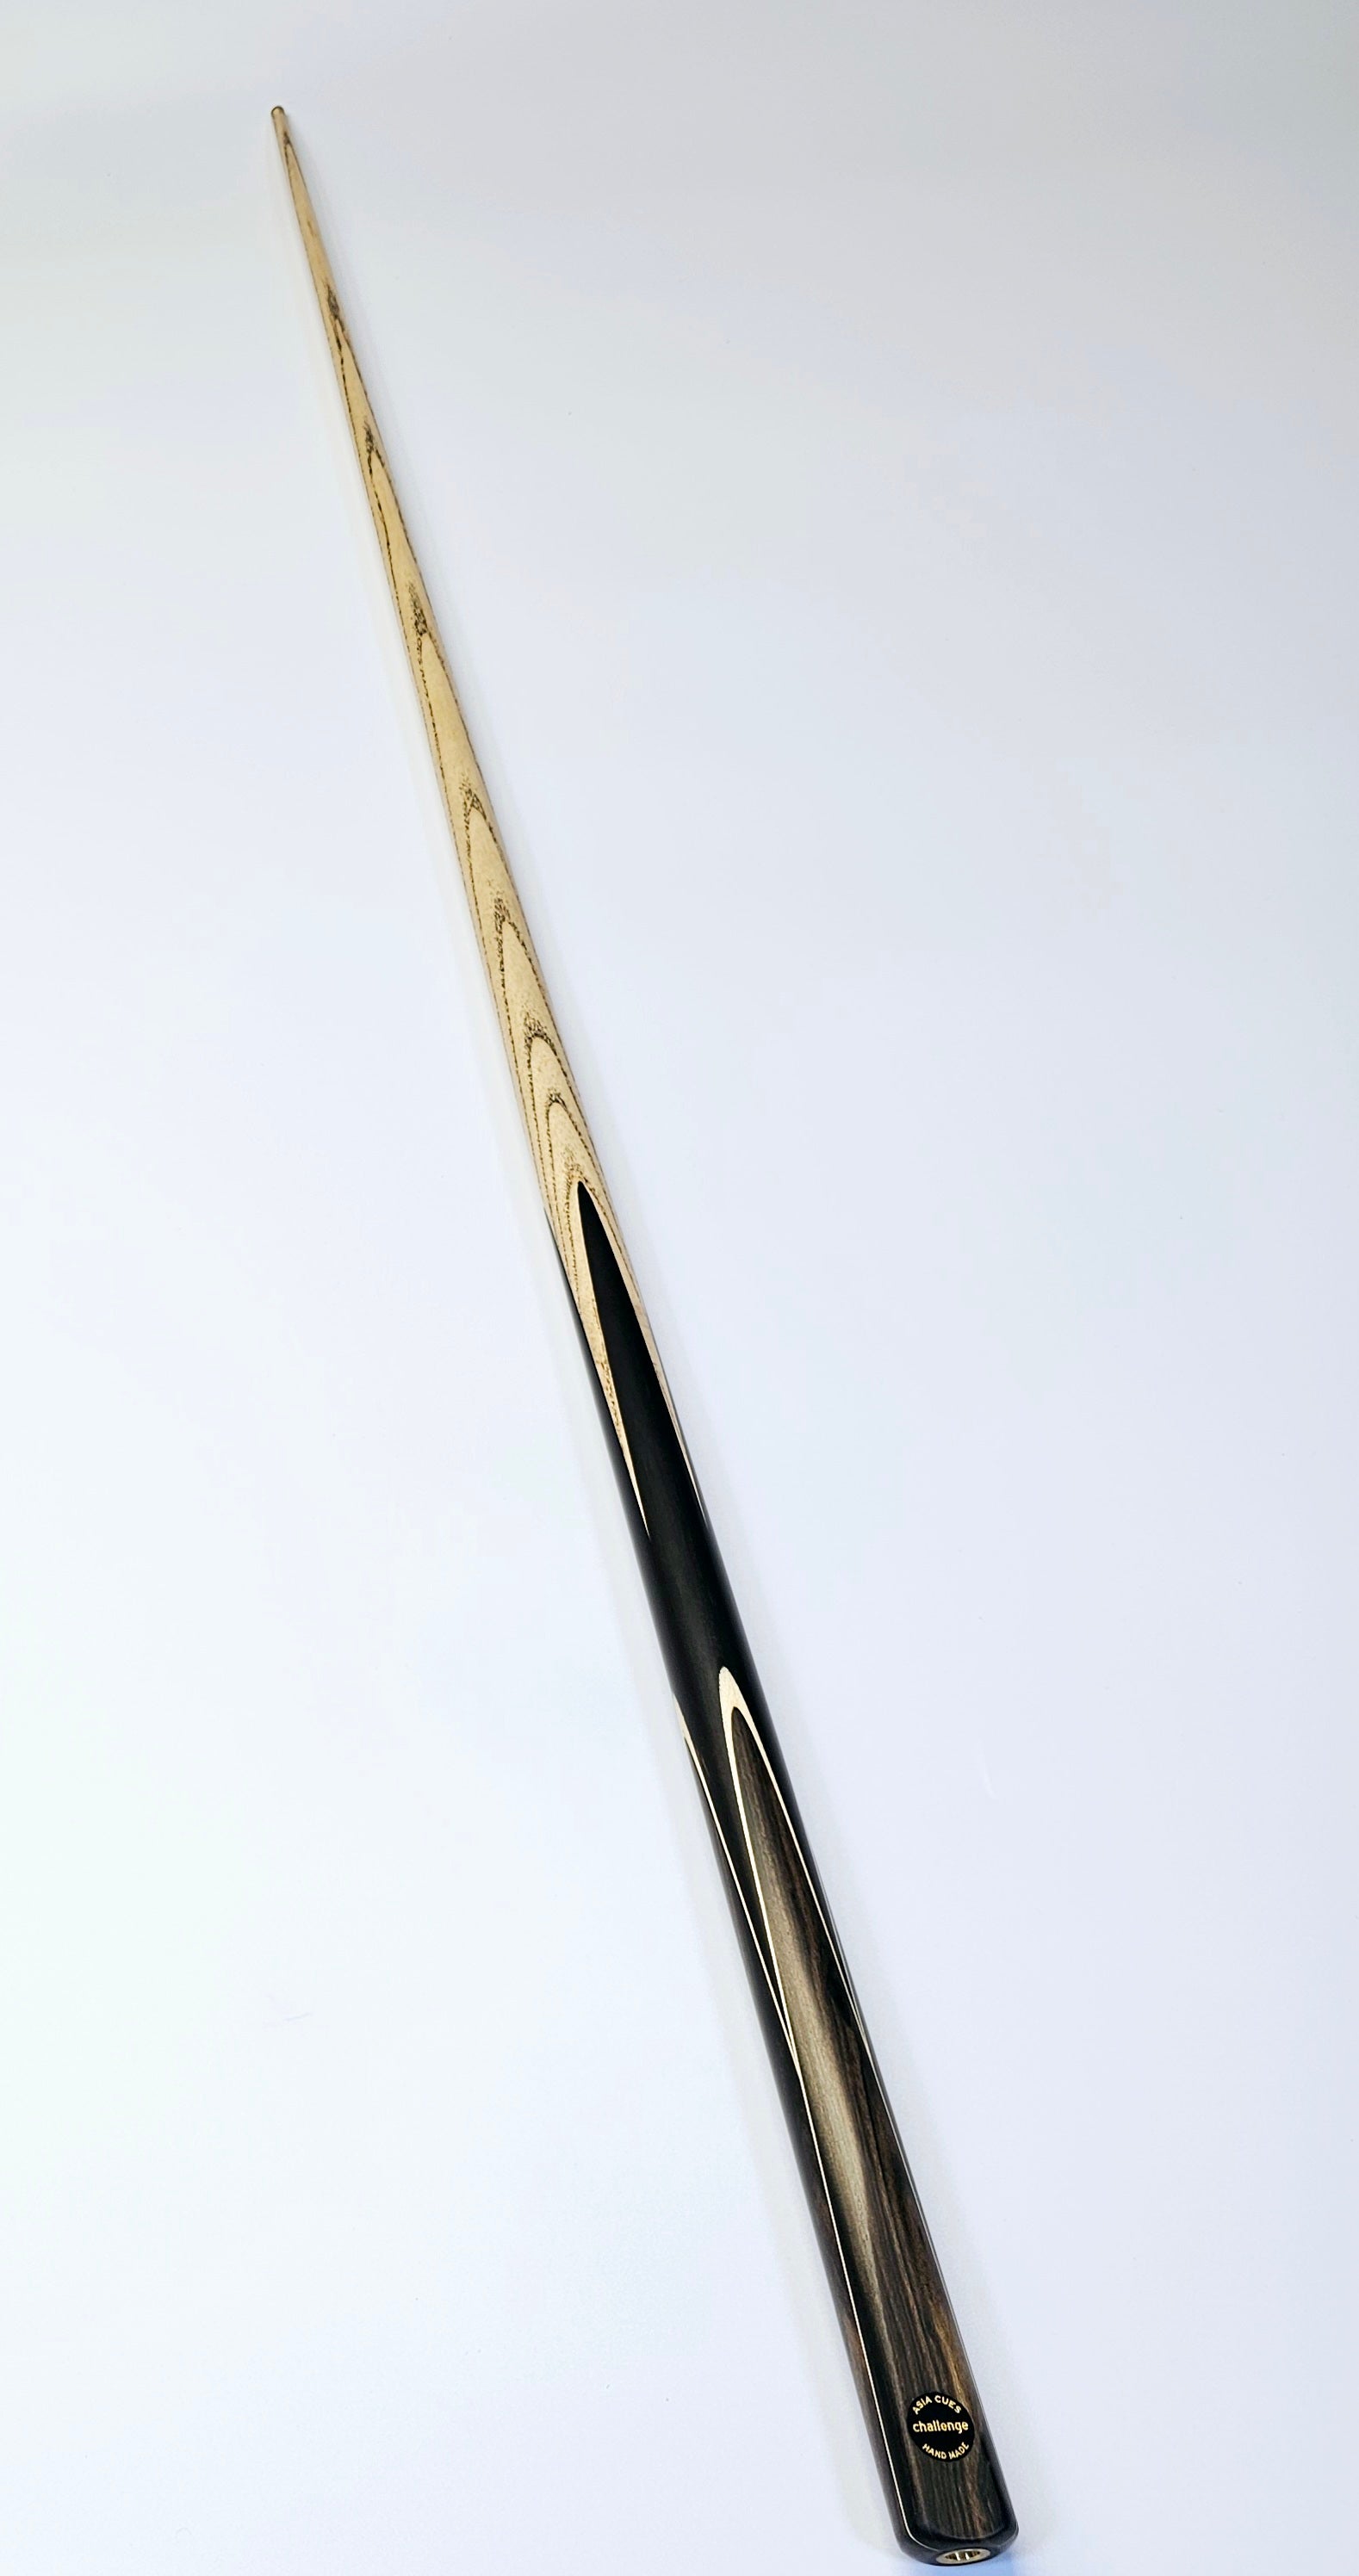 Asia Cues Challenge - One Piece Snooker Cue 9.7mm Tip, 18.1oz, 58"